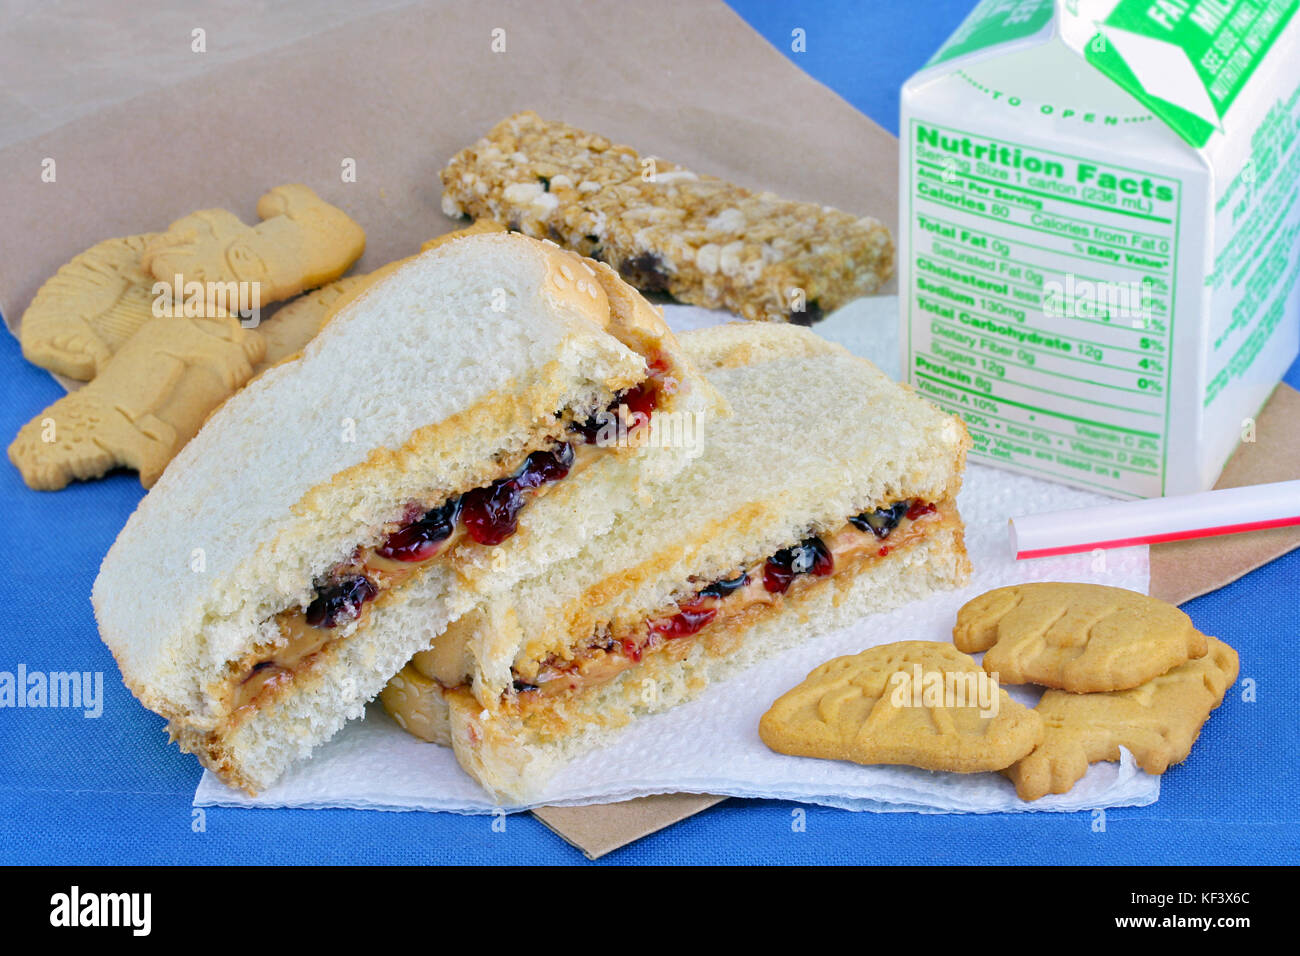 One Peanut Butter And Jelly Sandwich With A Granola Bar Cookies